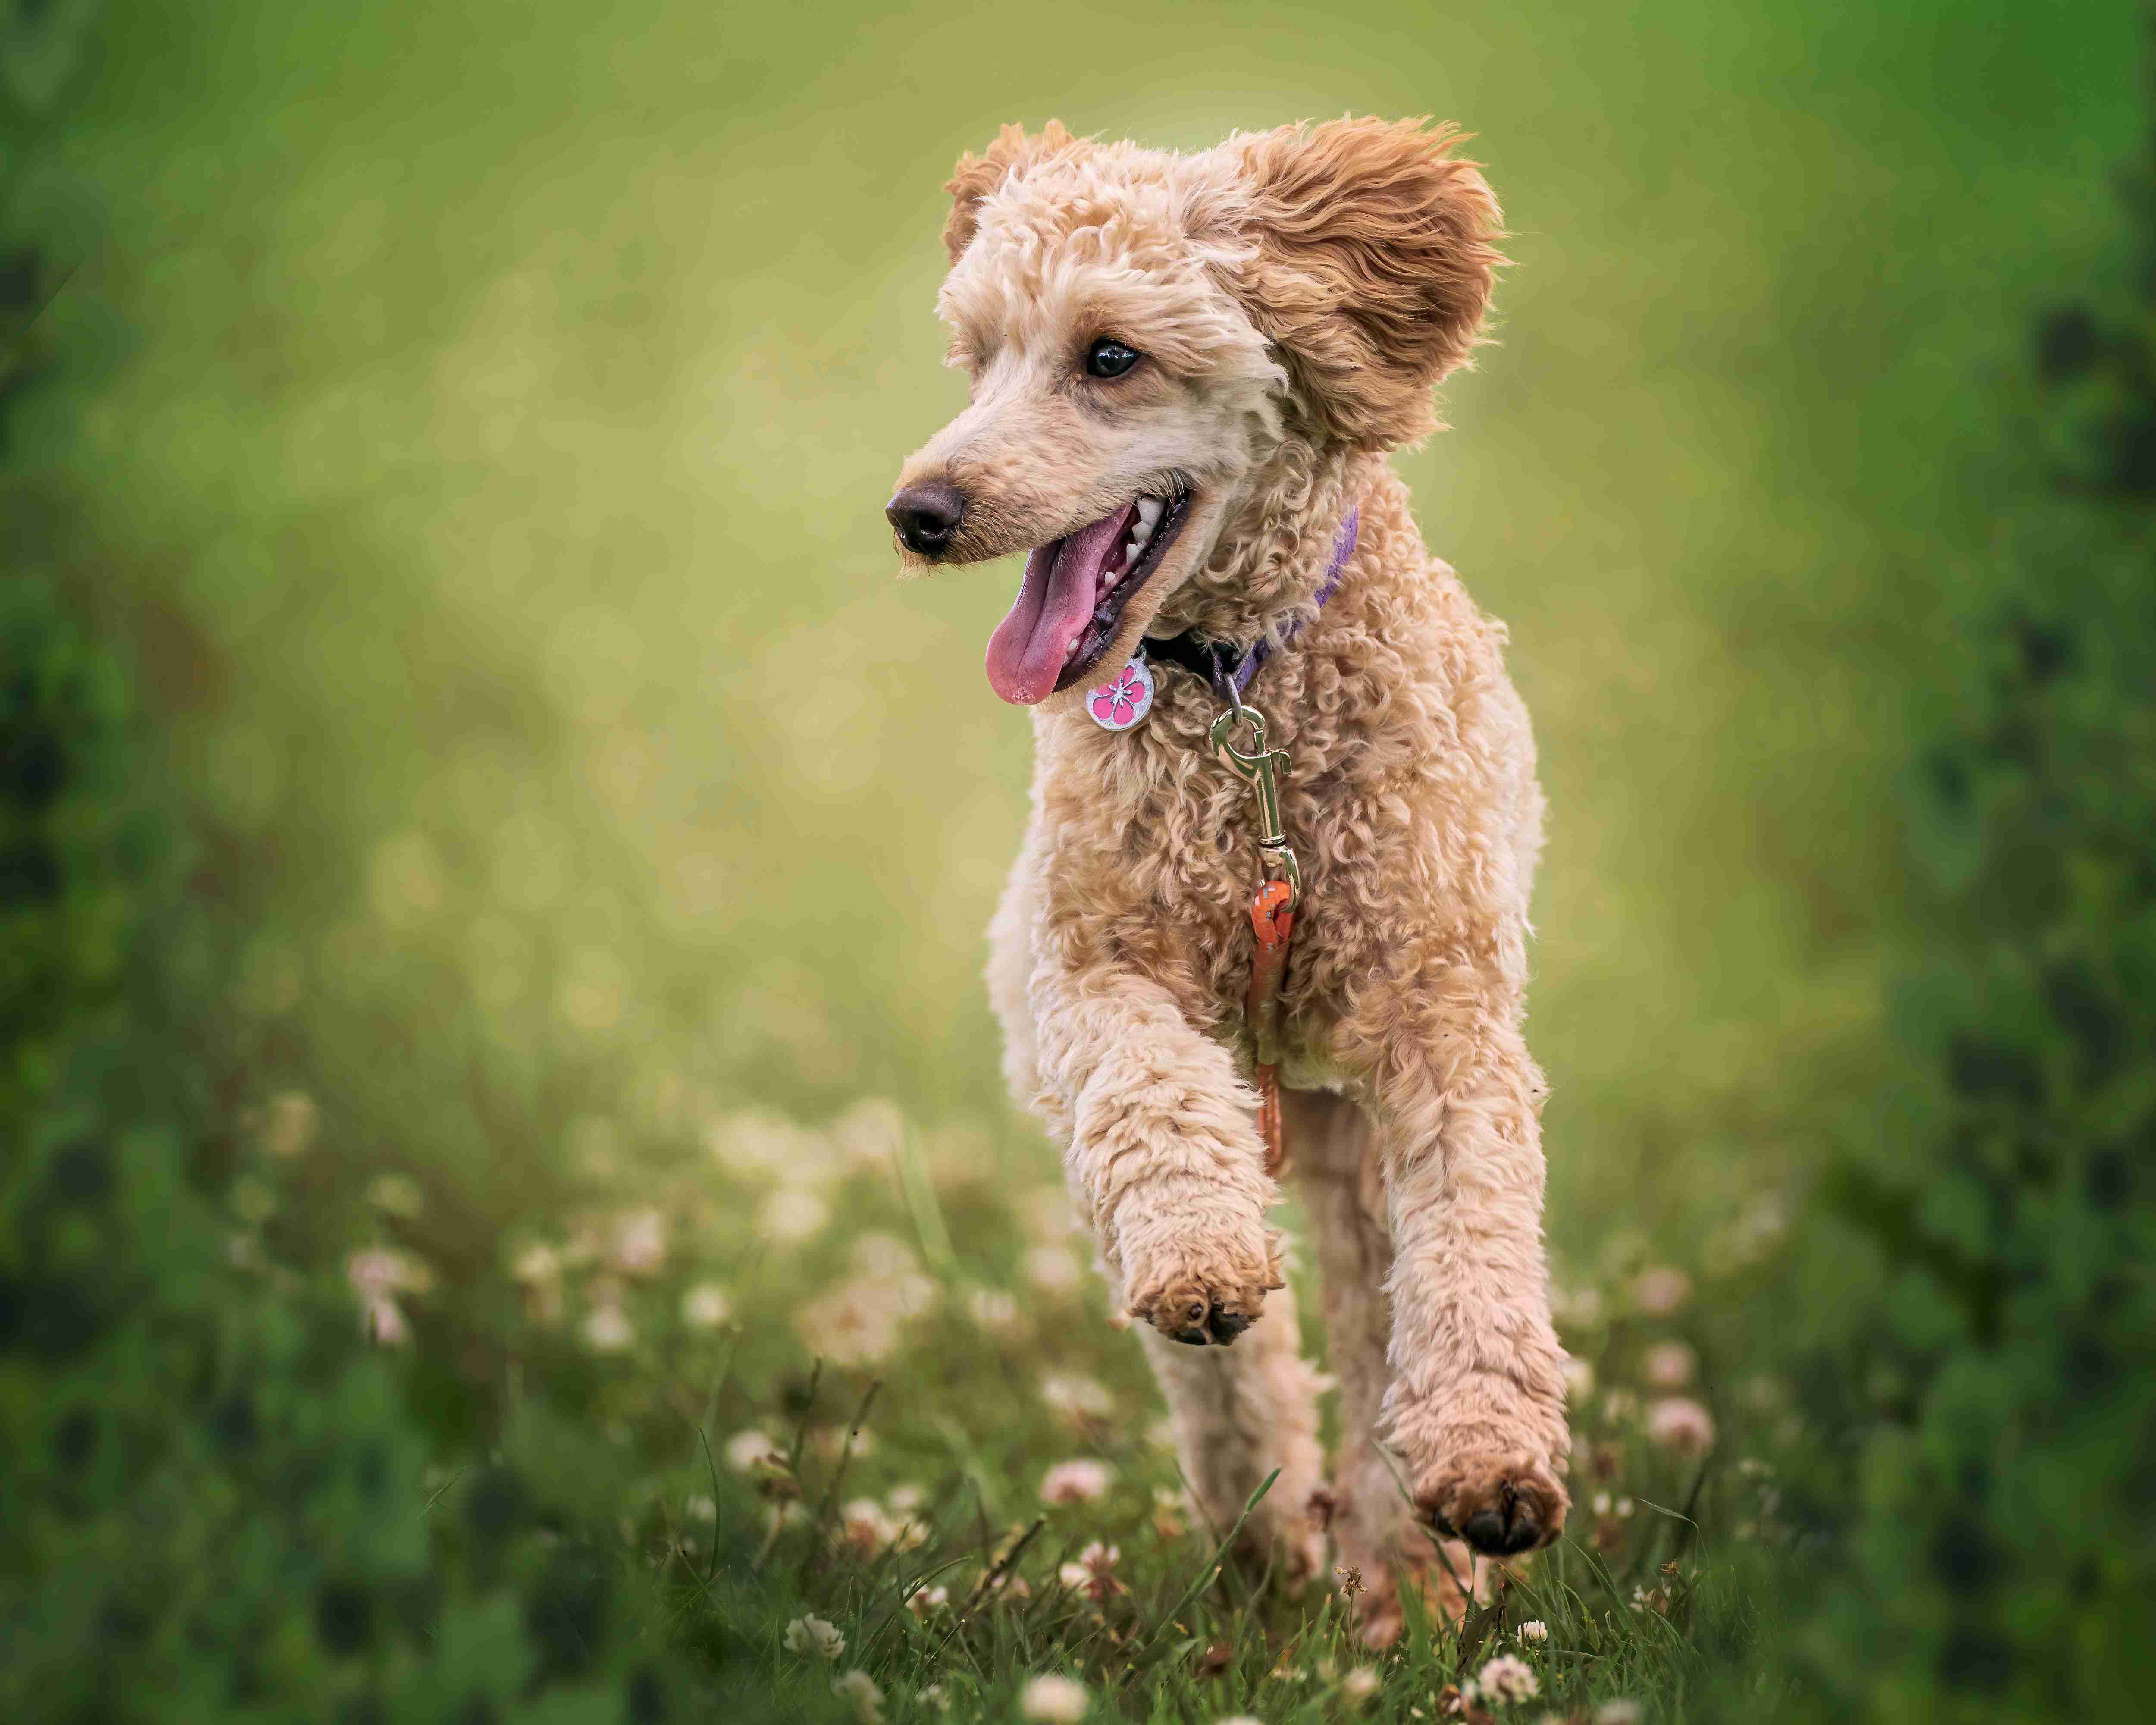 How can owners manage and treat liver conditions in Poodles?